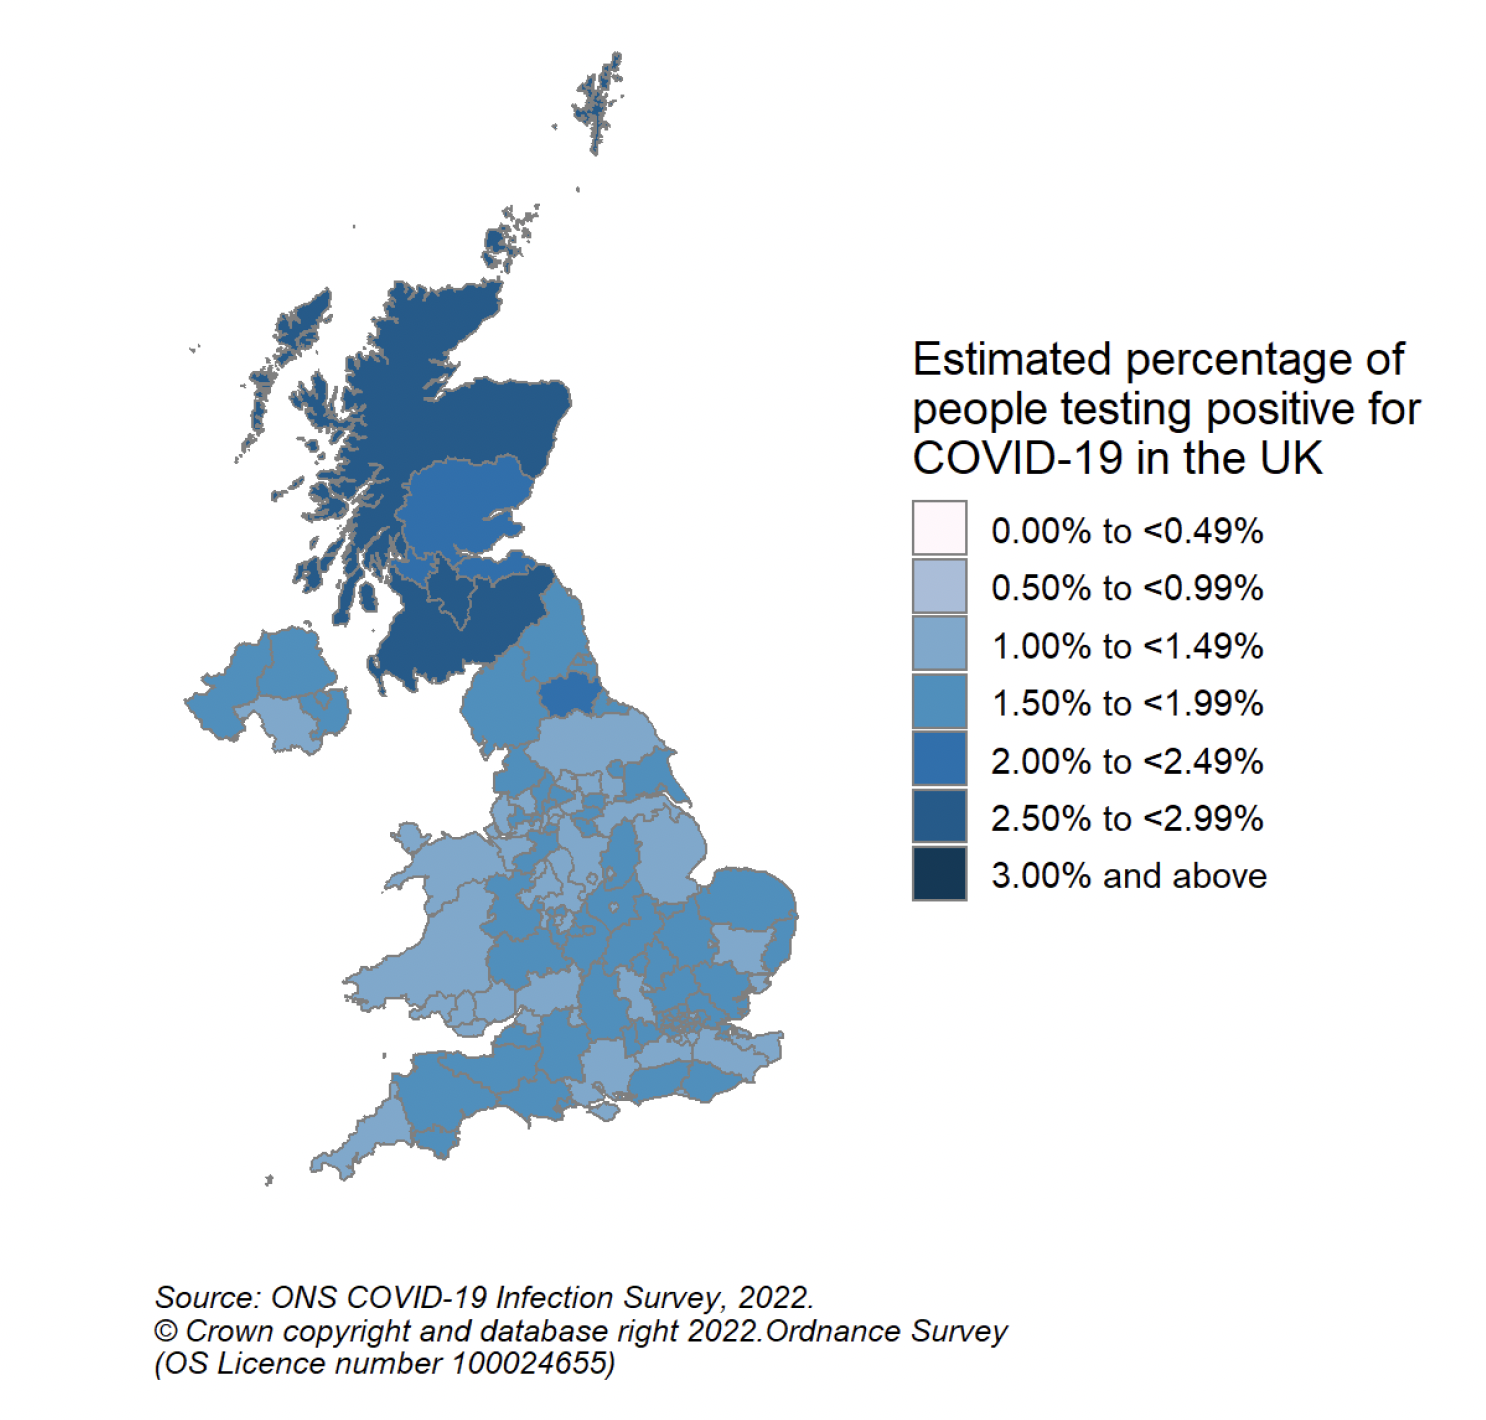 A colour coded map of the UK showing modelled estimates of the percentage of people living in private households within each CIS sub-region who would have tested positive for COVID-19 in the week 27 May to 2 June 2022. The map ranges from very light blue for 0.50% to 0.99%, light blue for 1.50% to 1.99%, blue for 2.00% to 2.49%, darker blue for 2.50% to 2.99%, and very dark blue for 3.00% estimated positivity and over. Scotland CIS sub-regions are marked with blue (2.00% to 2.49%) and darker blue (2.50% to 2.99% positivity).